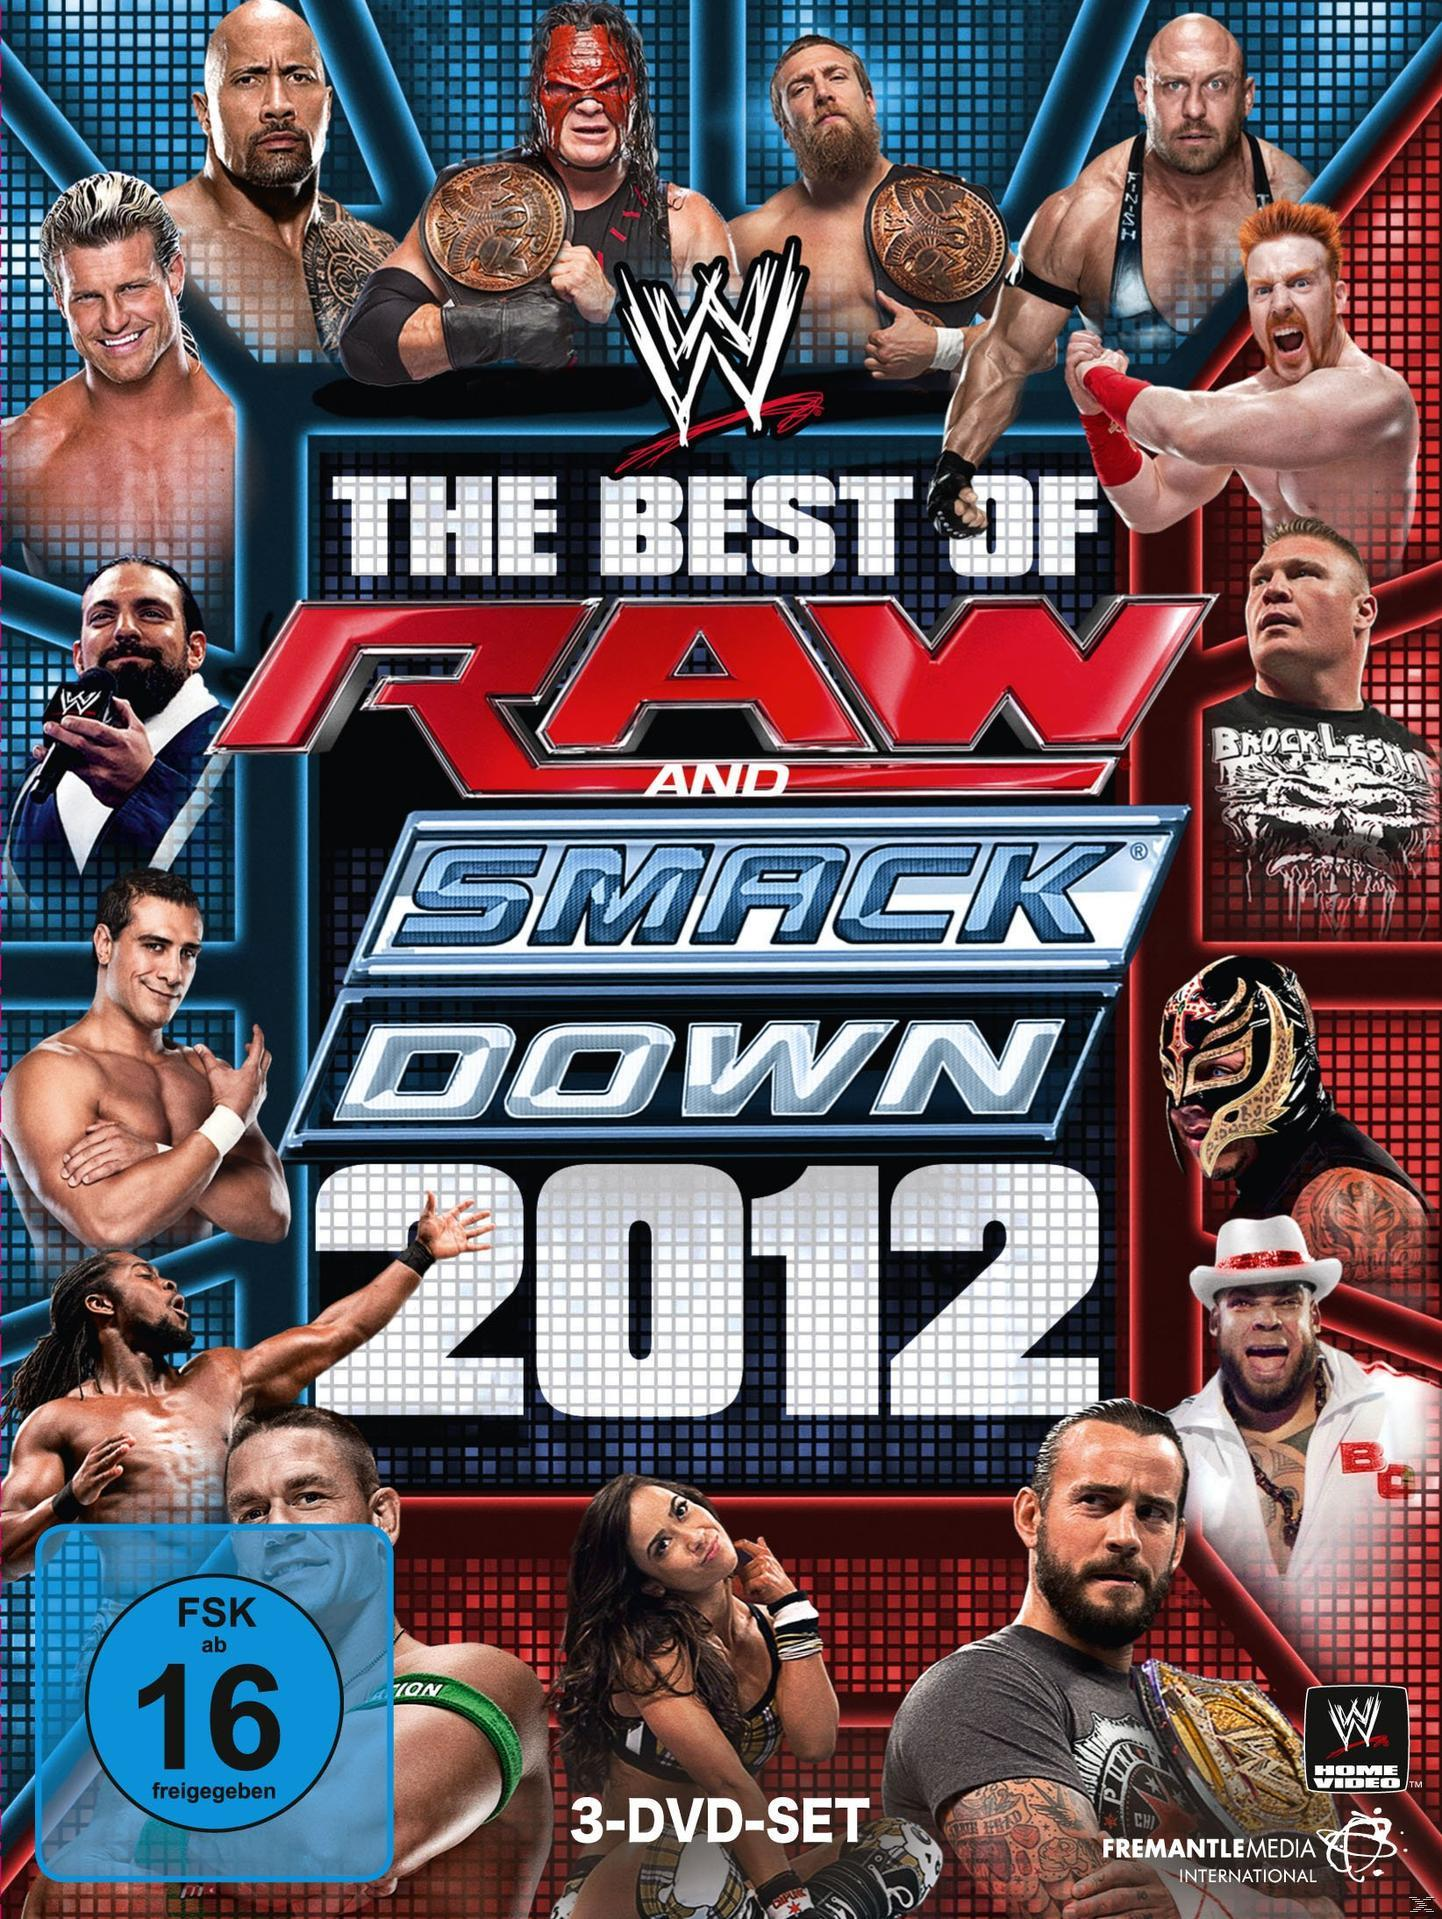 2012 WWE Smackdown Raw & The - DVD of Best